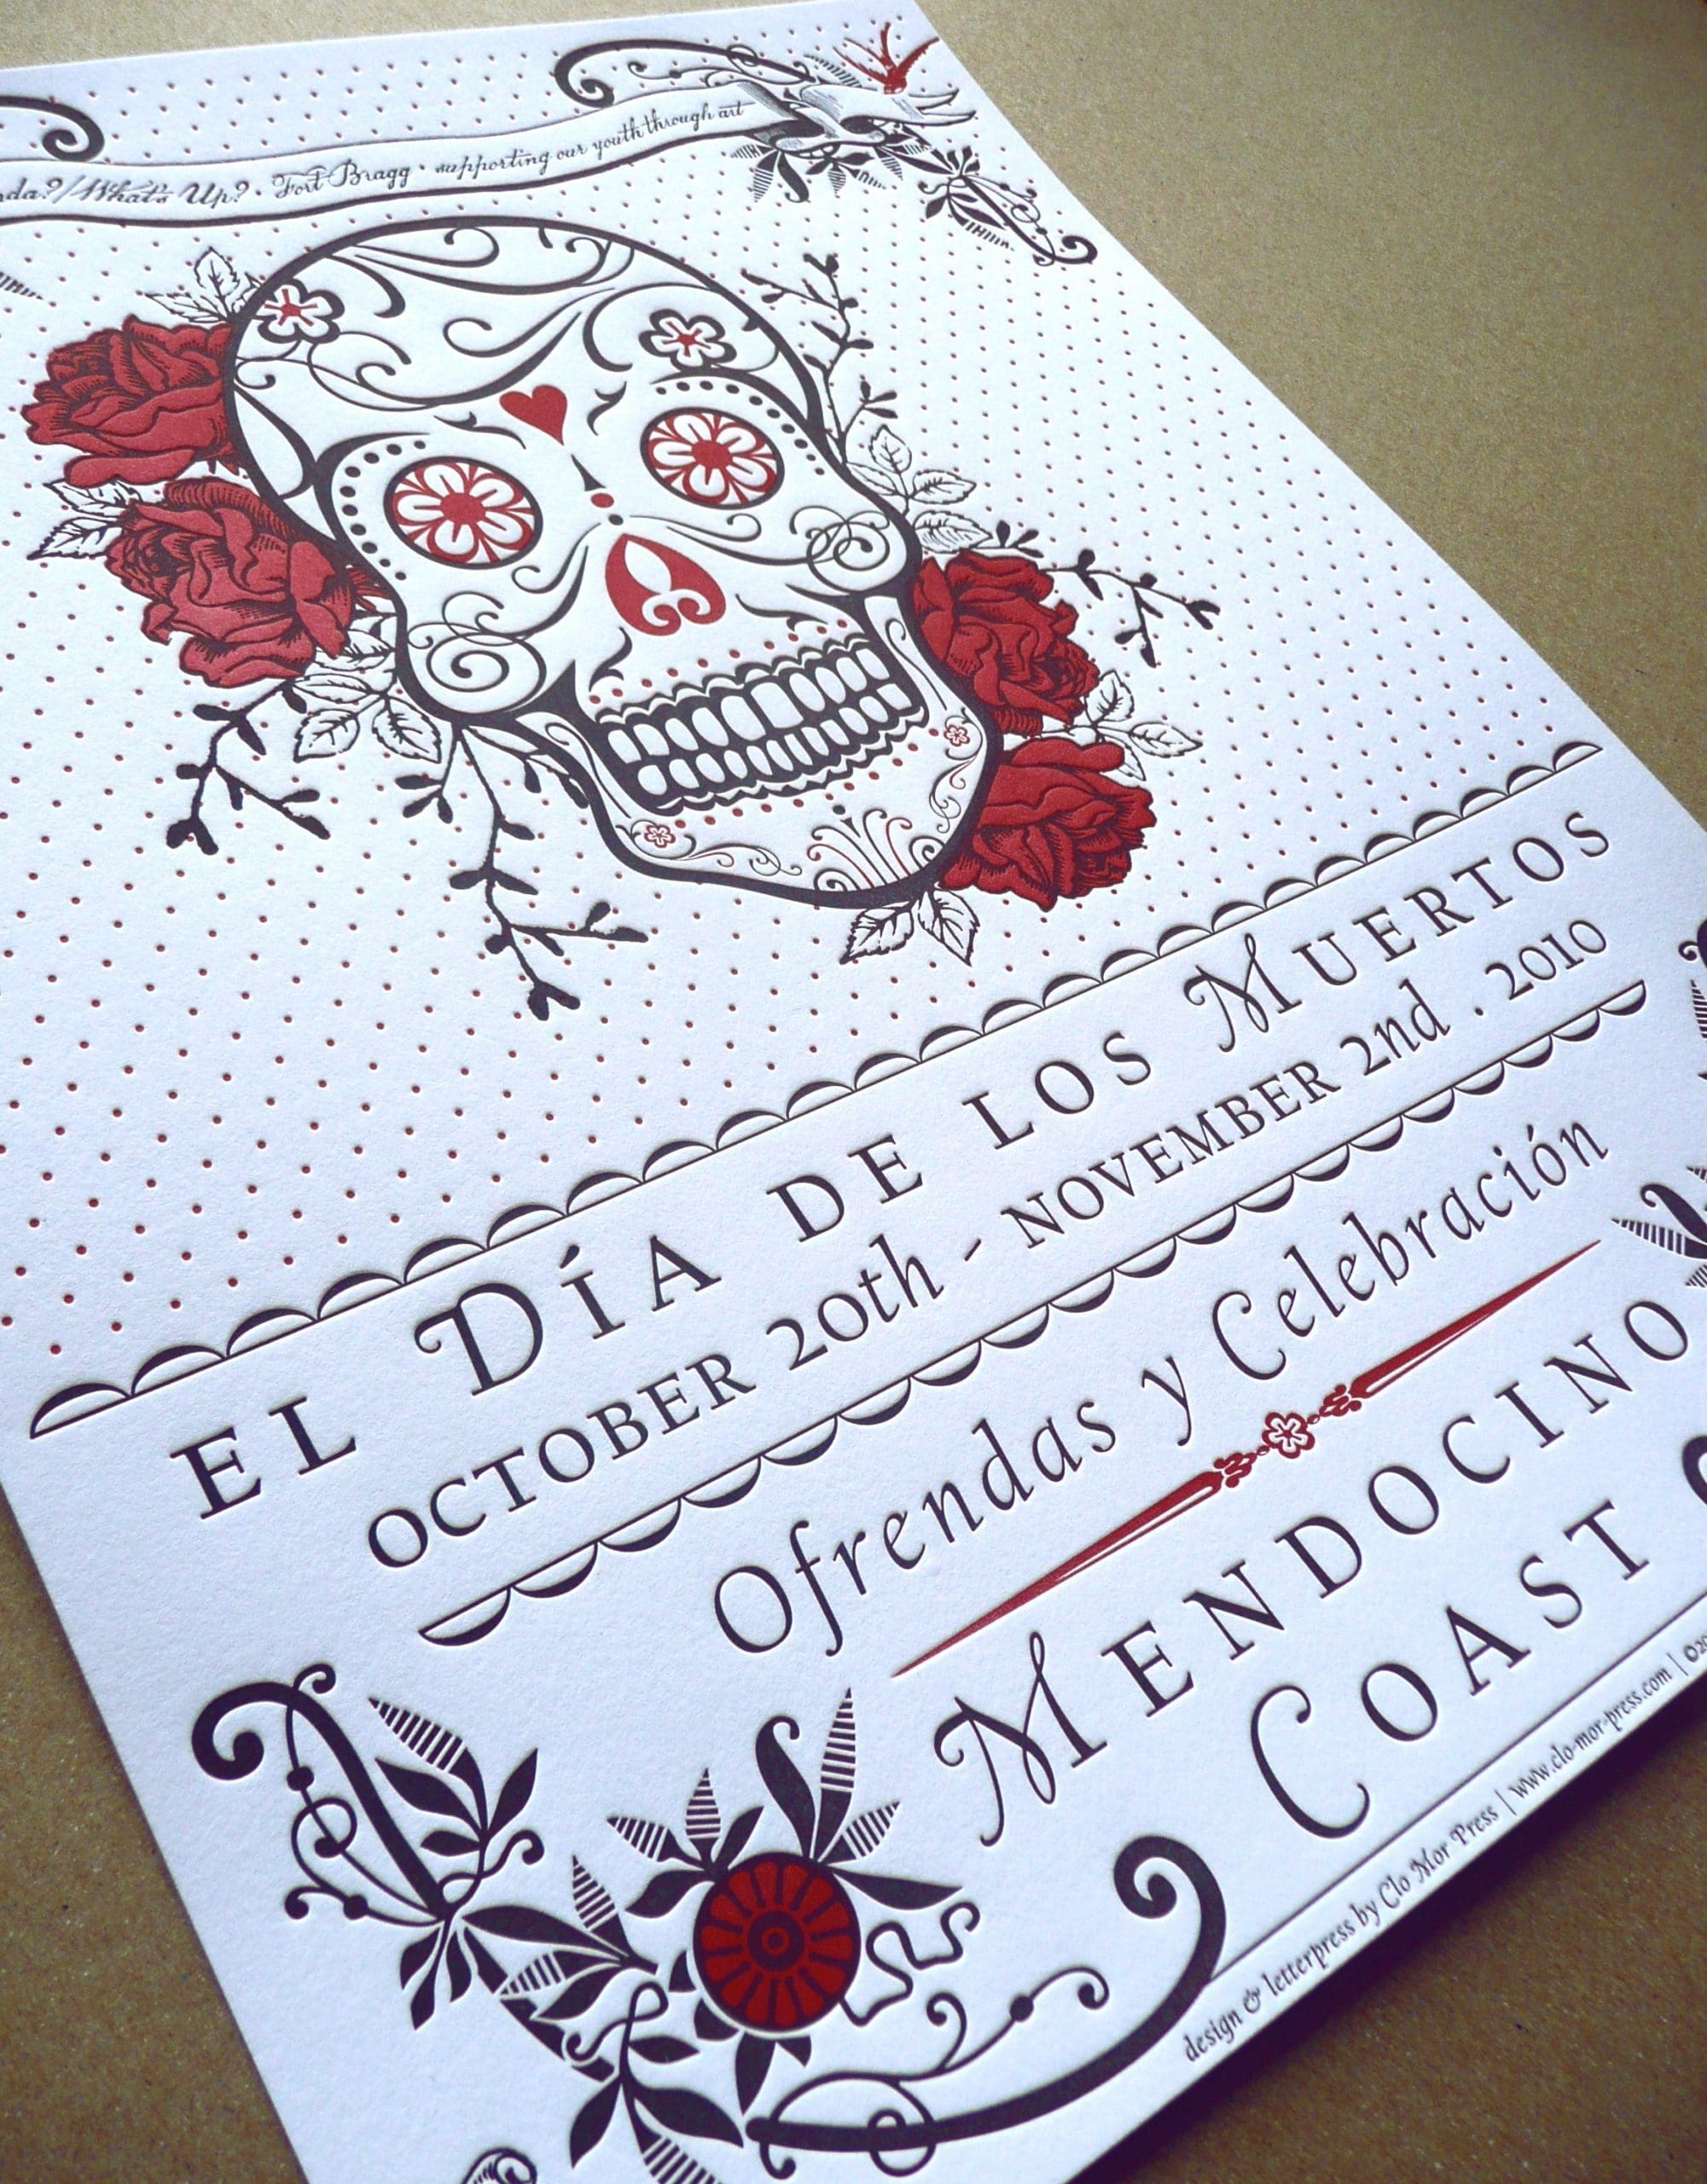 Day of the Dead Mendocino Coast Limited Edition Poster 2010